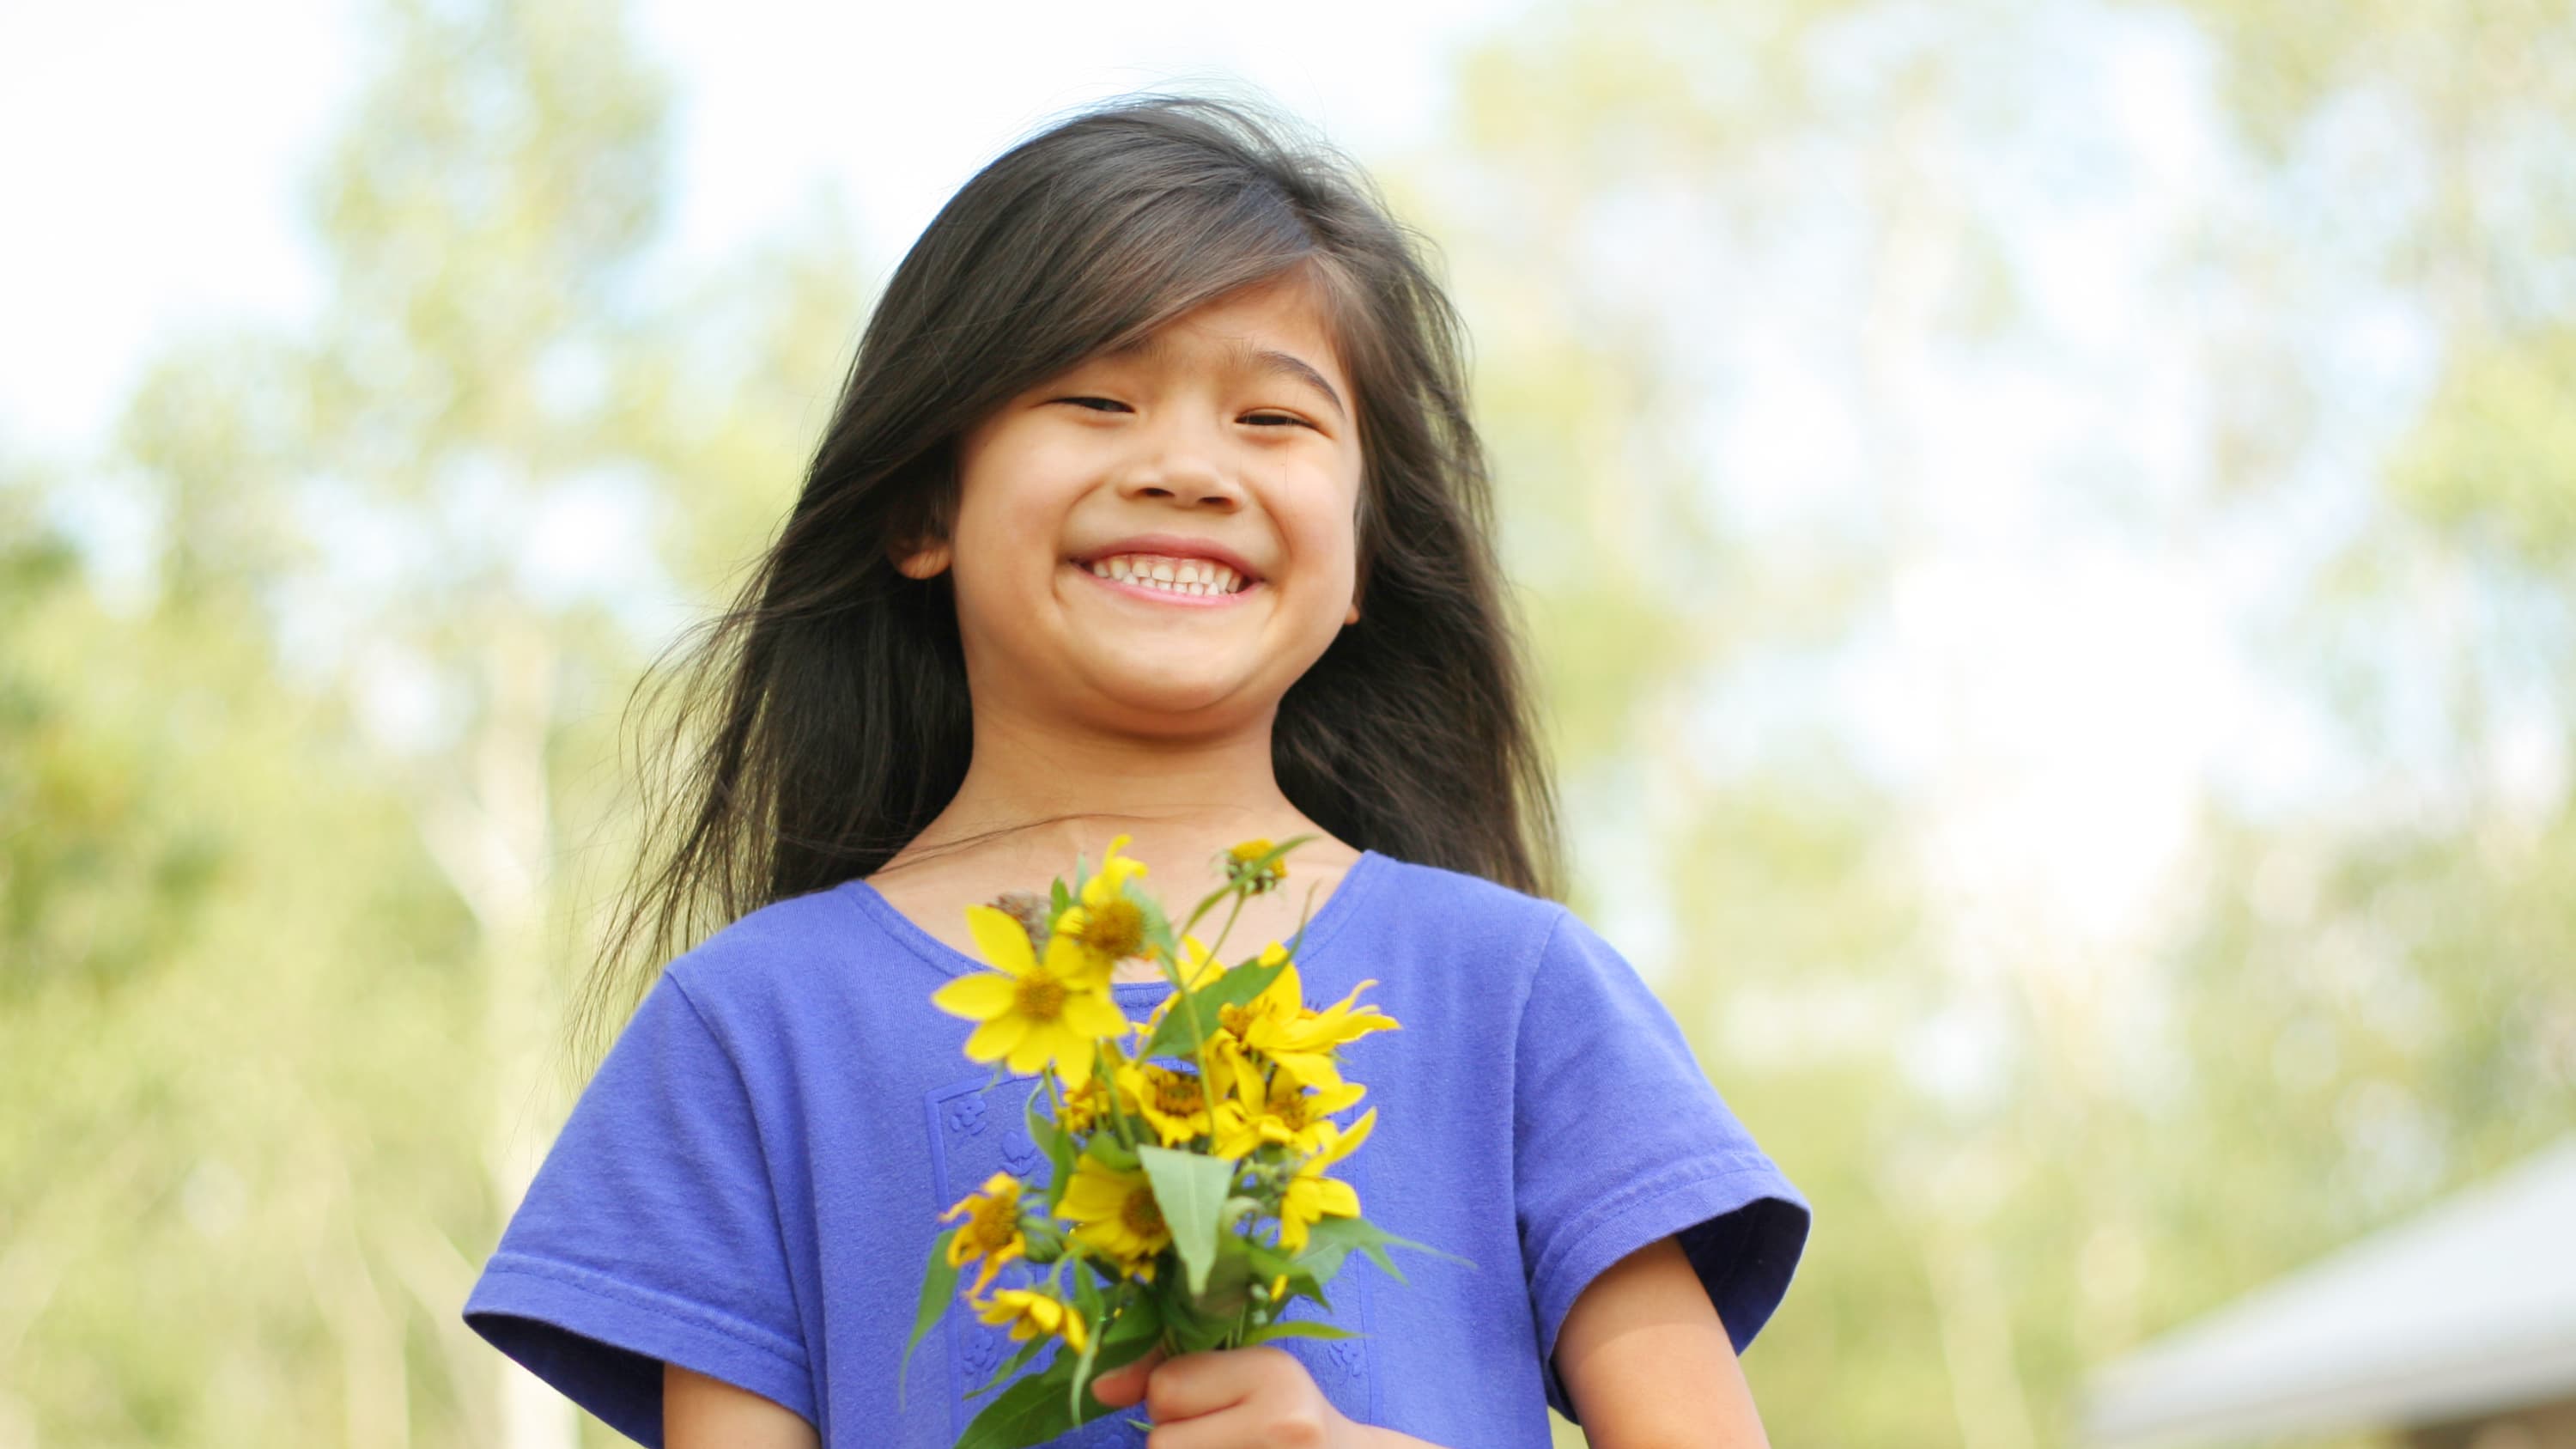 A young girl with epilepsy smiles for the camera while holding flowers.